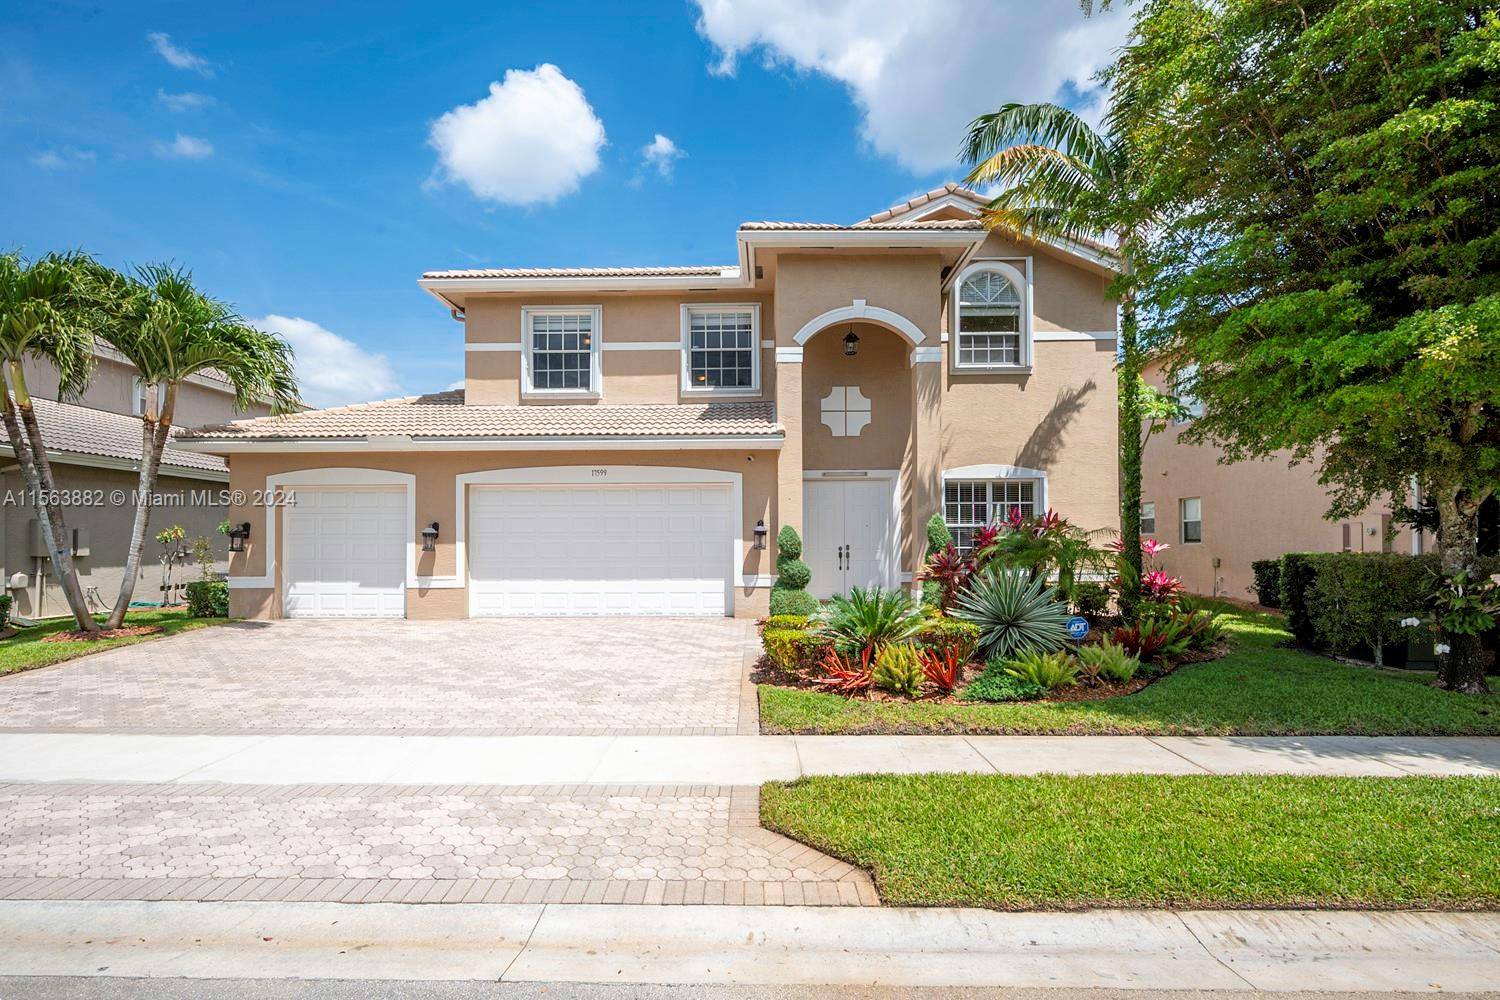 Welcome to your oasis of luxury living in Miramar, FL !